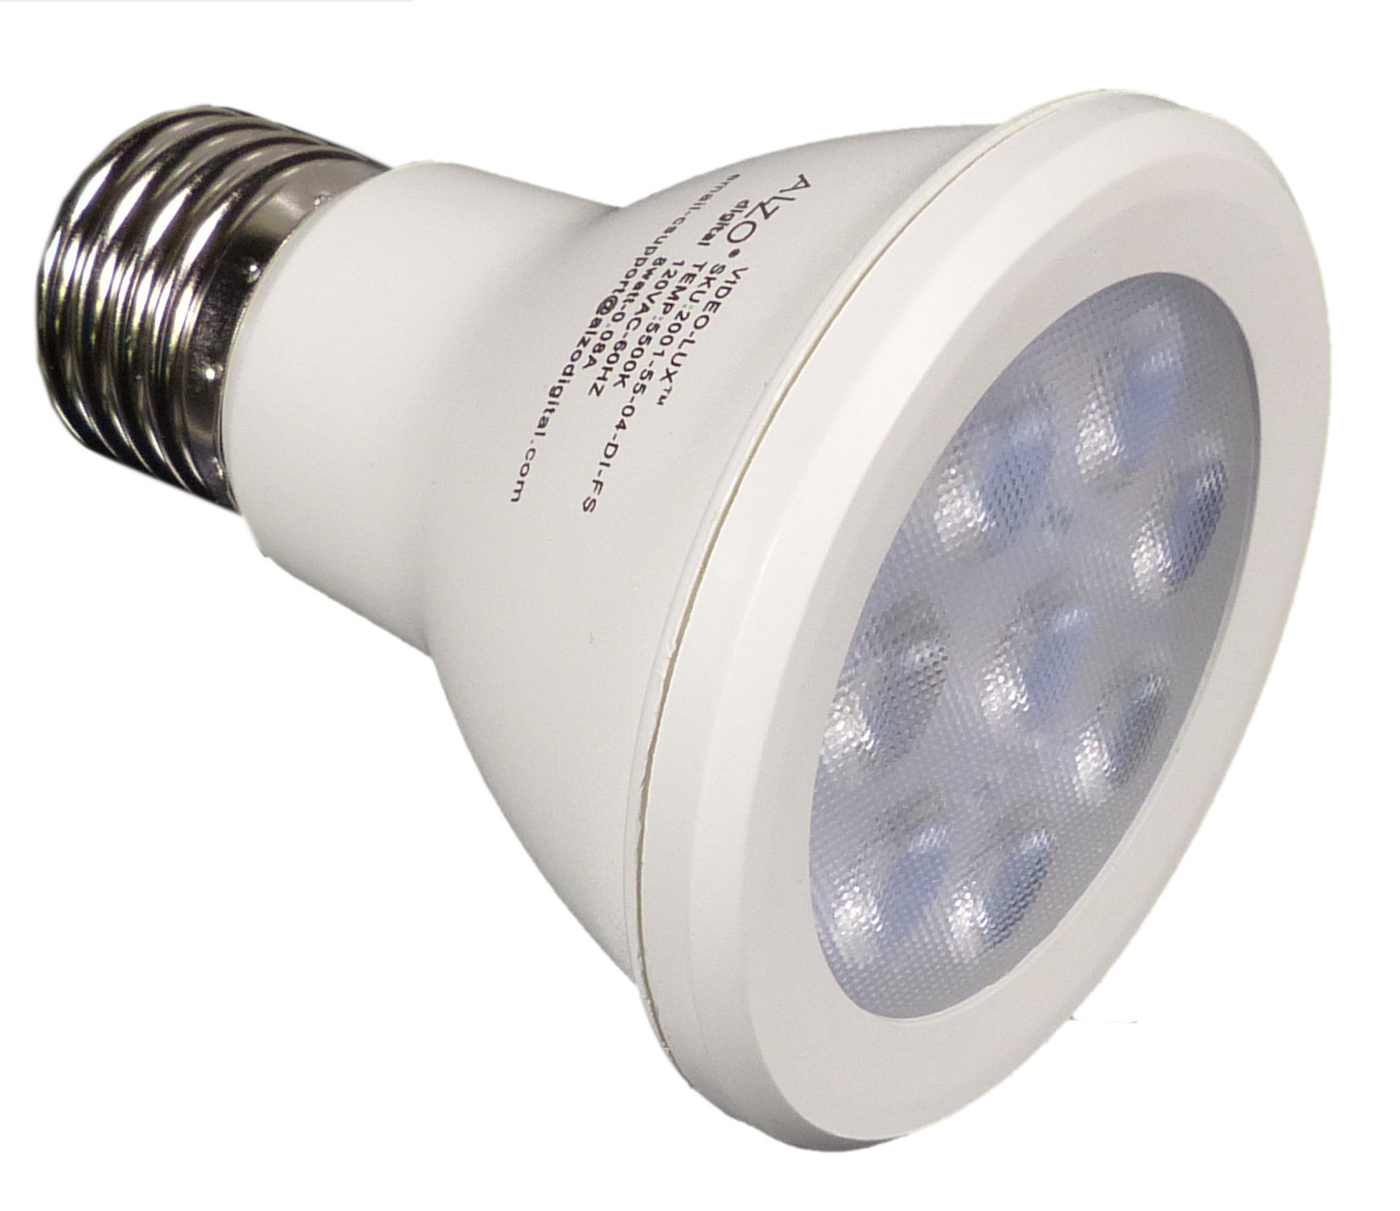 dimmable led